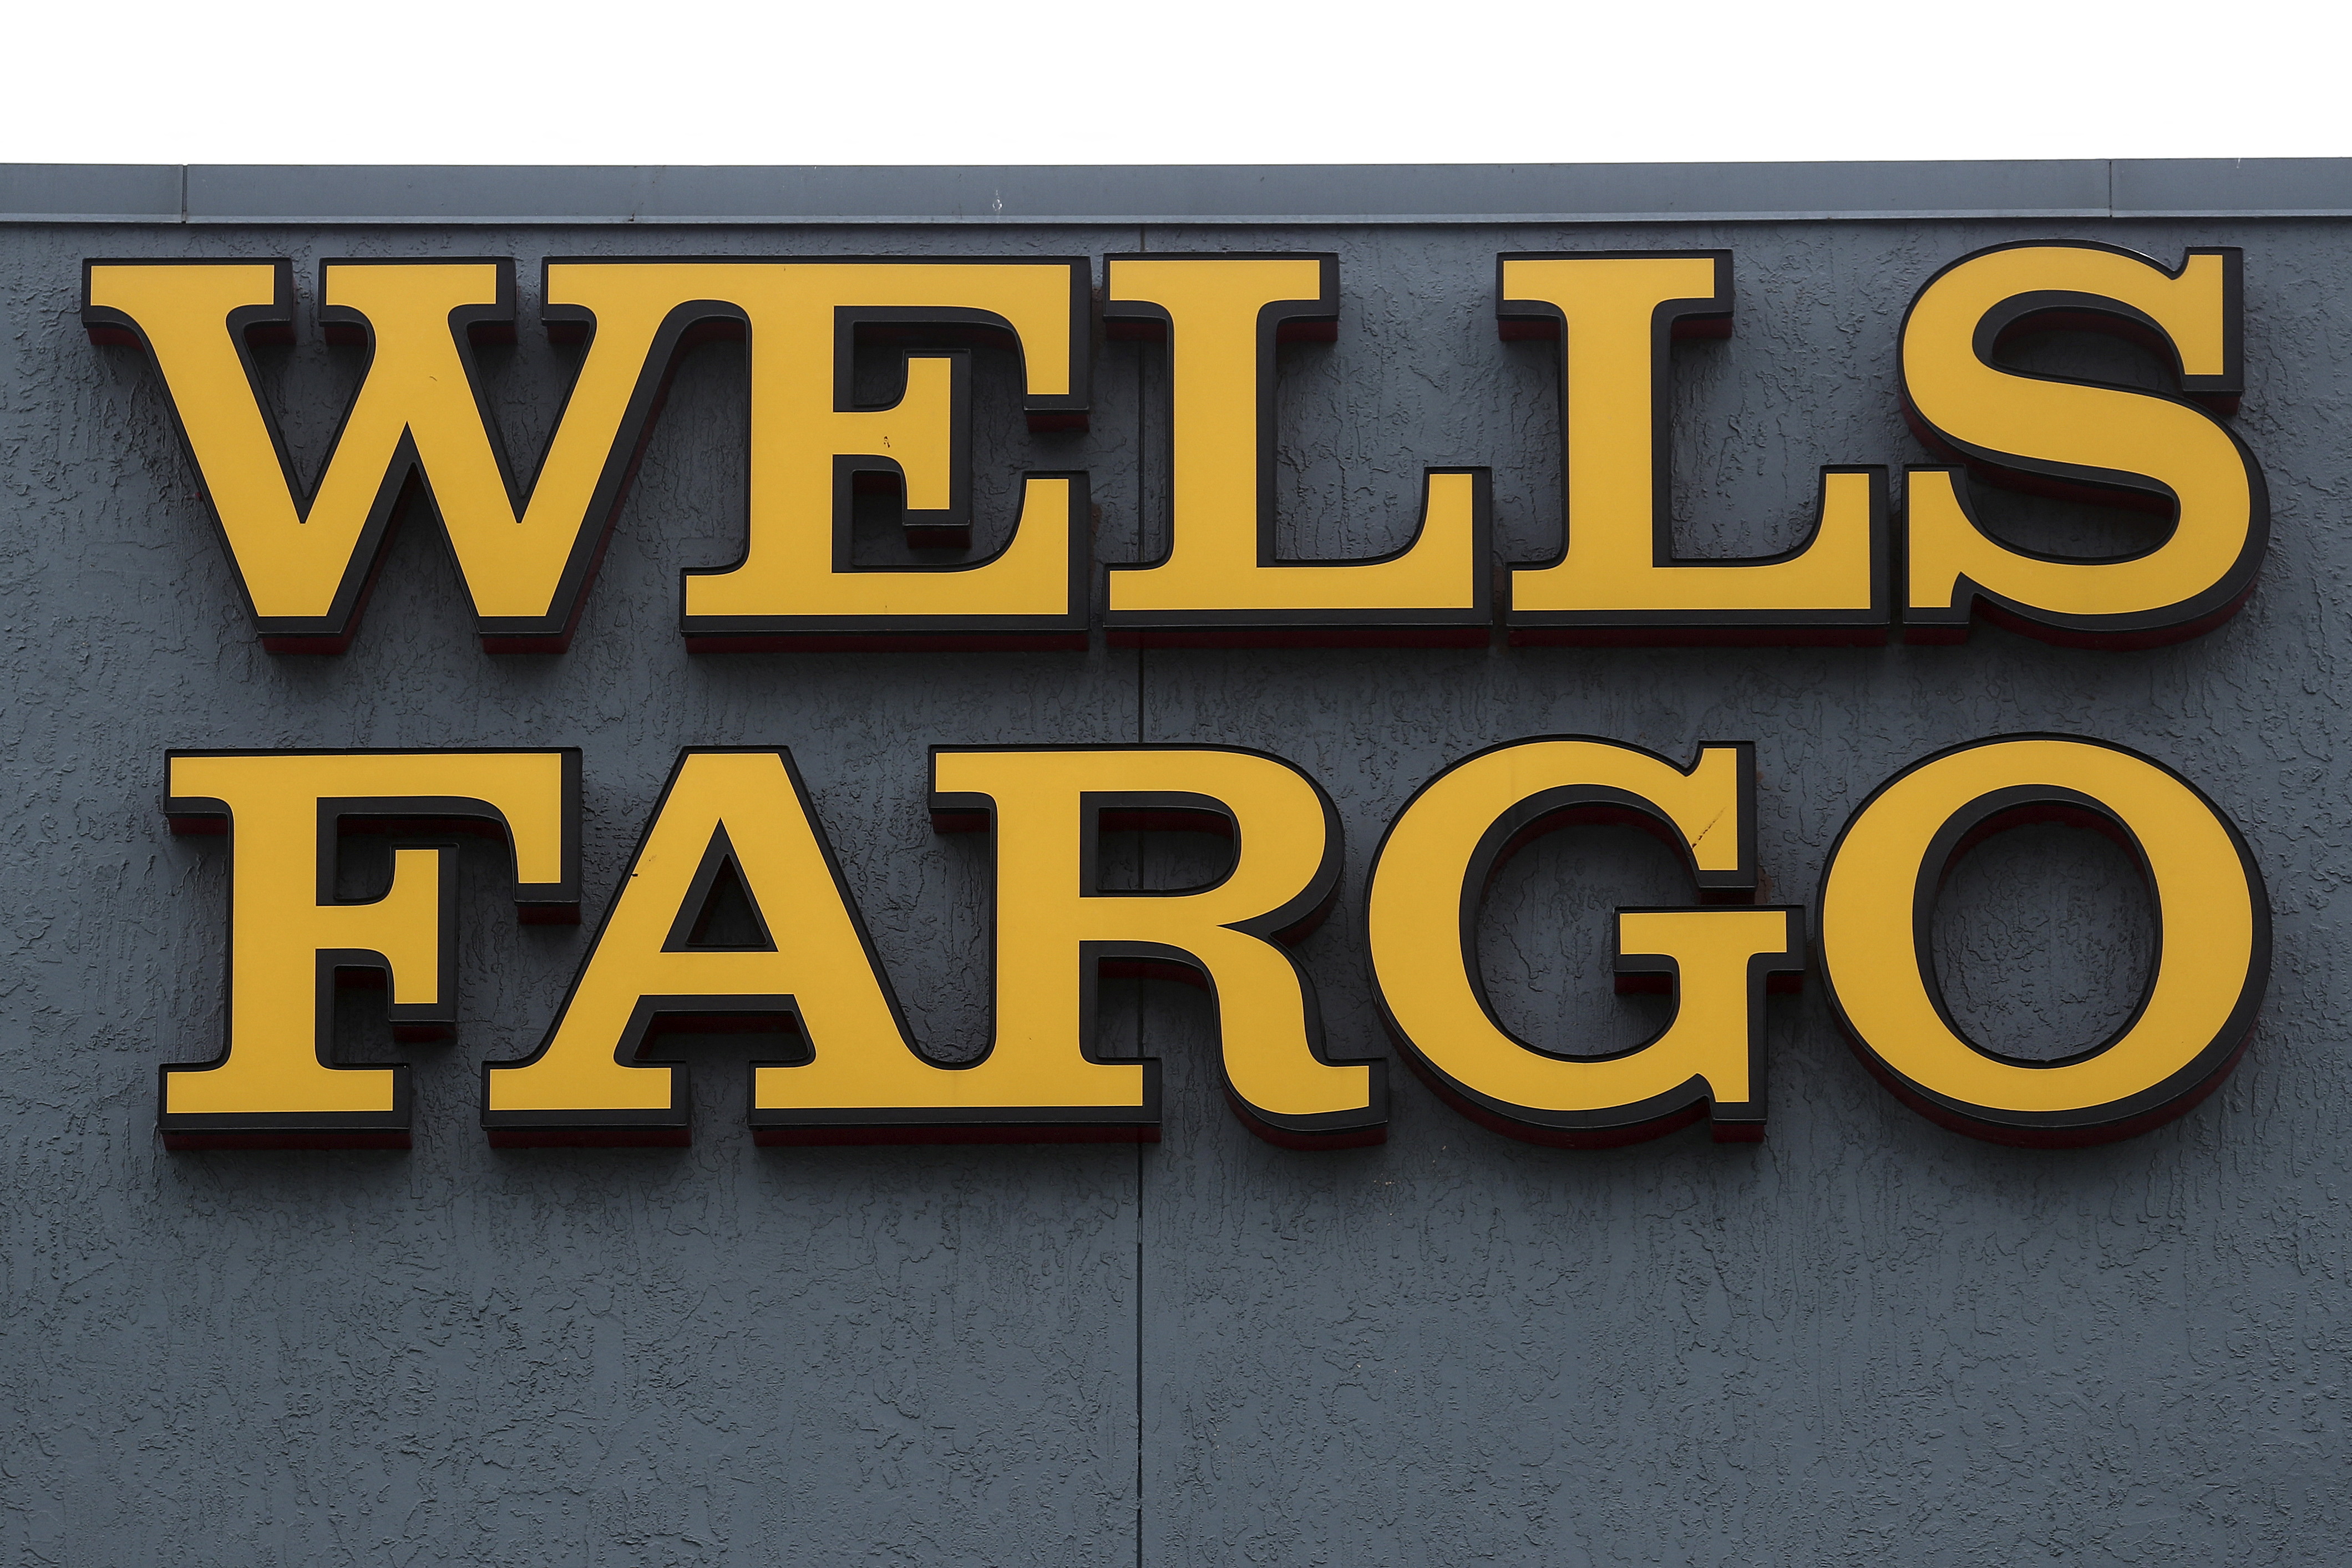 A Wells Fargo bank logo is pictured on a building in North Miami, Florida